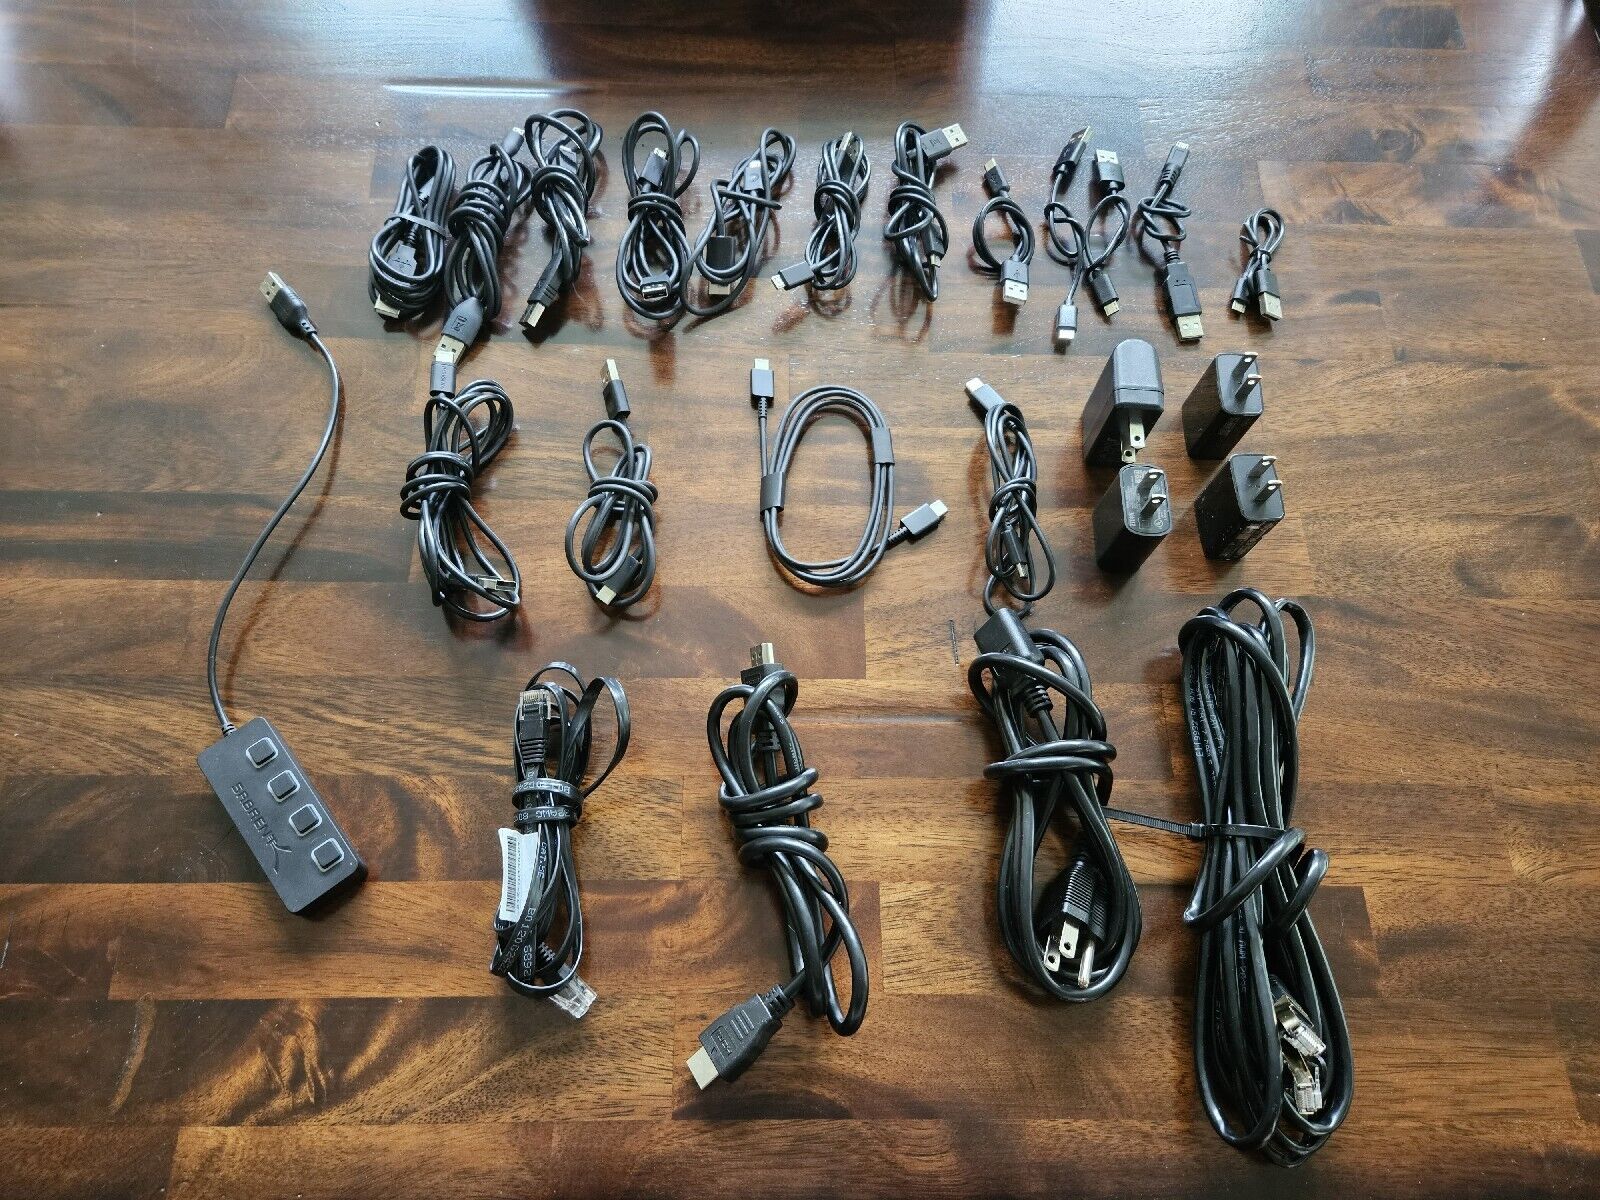 Mixed Lot of 21 Cables Incl PC Power - USB - Ethernet & 4 Adaptors preowned